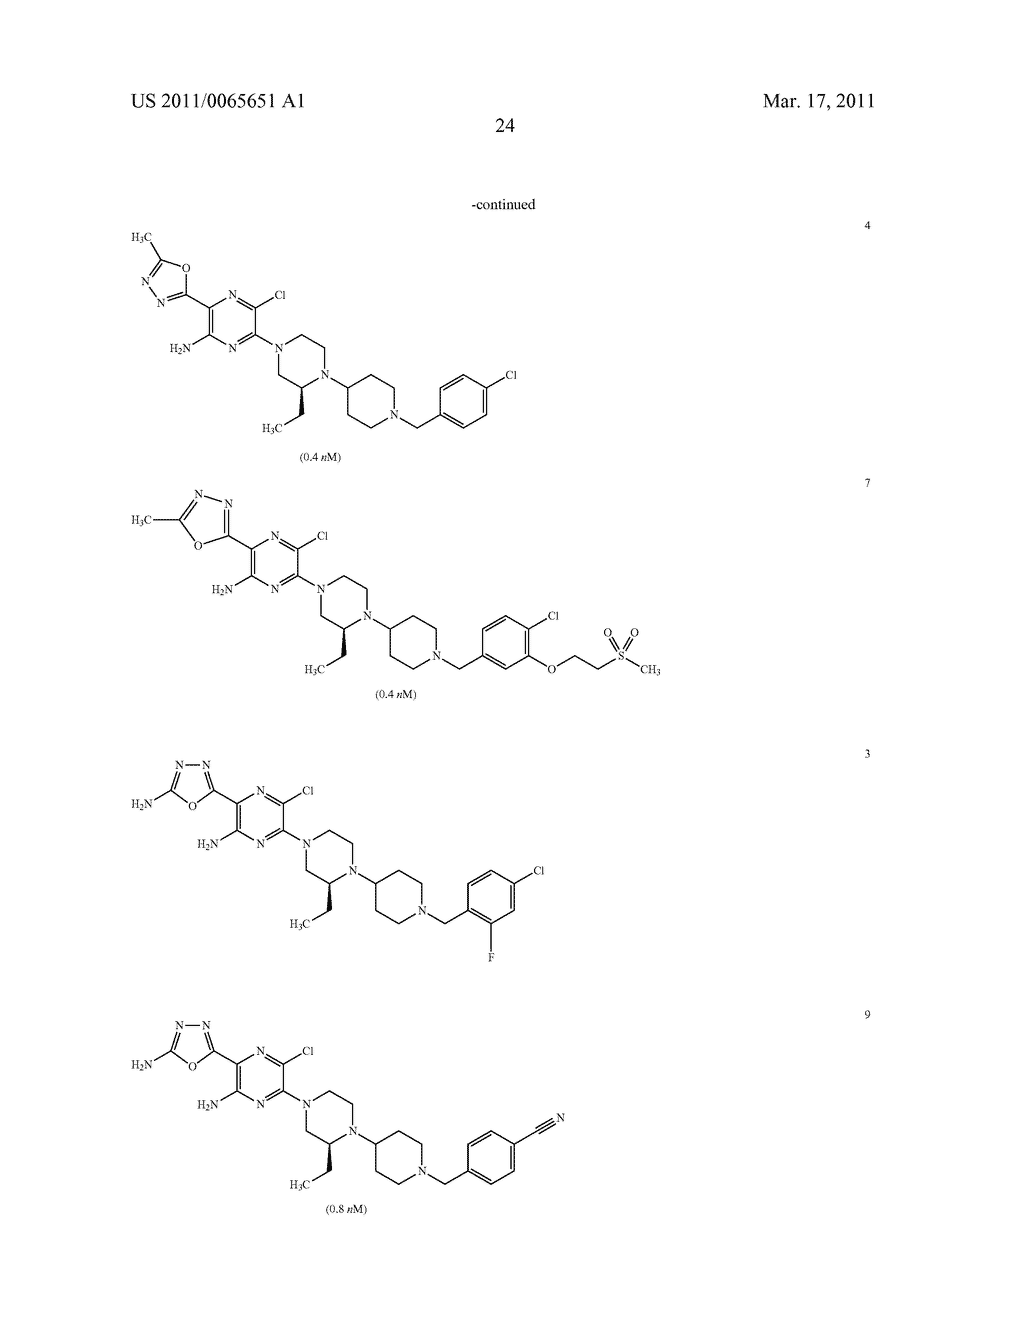 HETEROCYCLIC SUBSTITUTED PIPERAZINES WITH CXCR3 ANTAGONIST ACTIVITY - diagram, schematic, and image 25